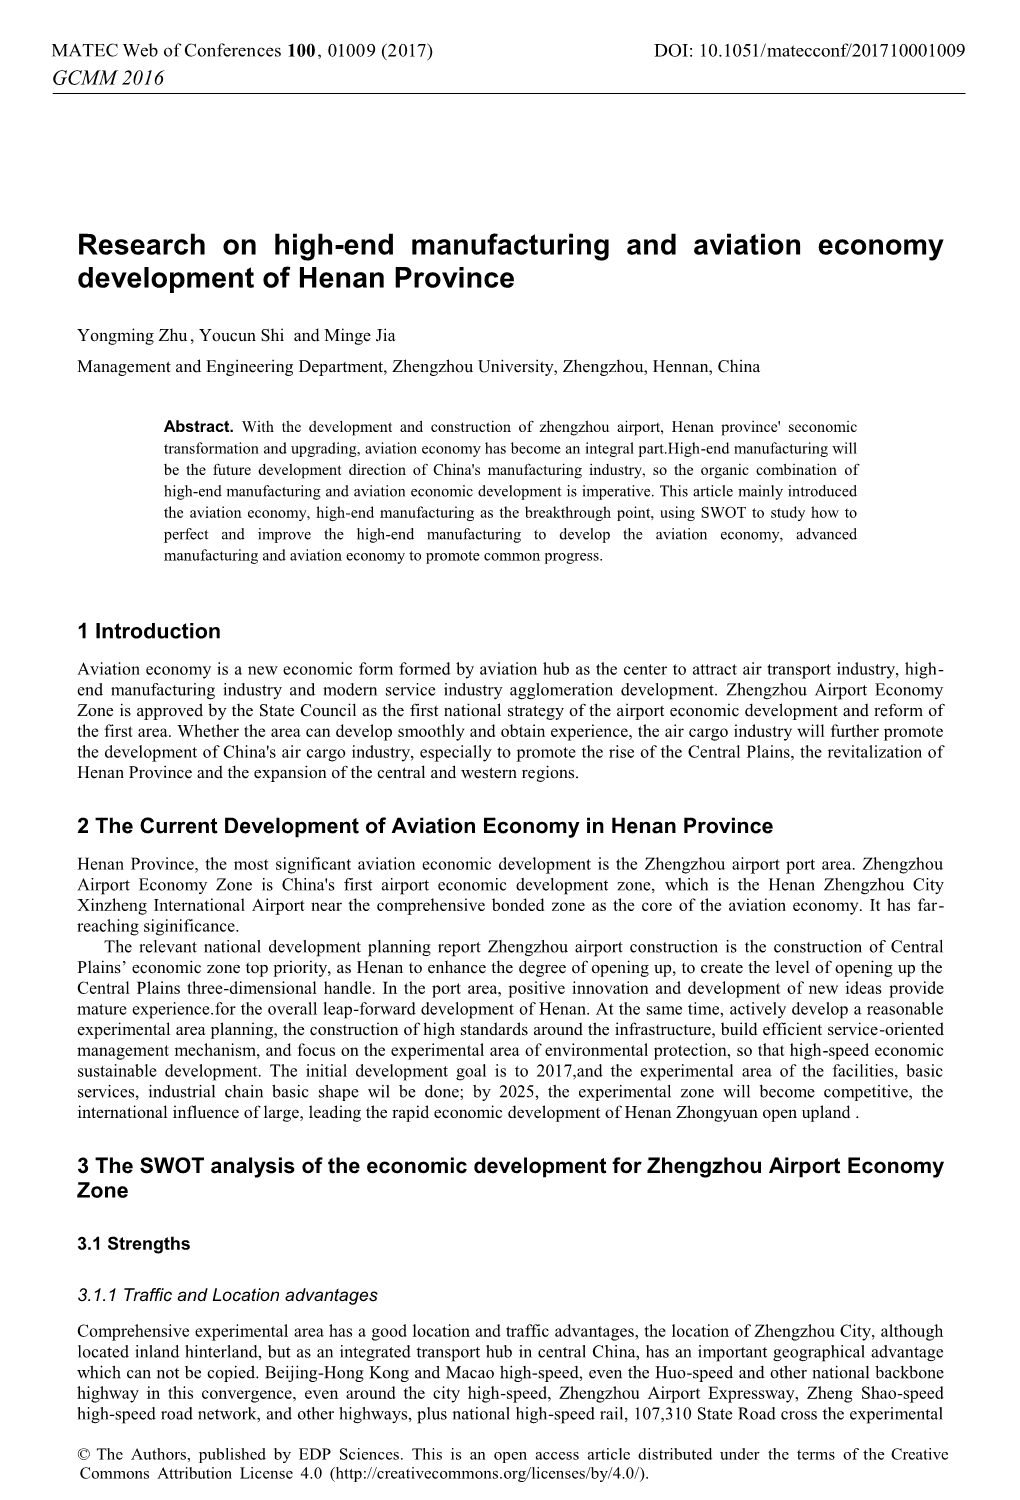 Research on High-End Manufacturing and Aviation Economy Development of Henan Province